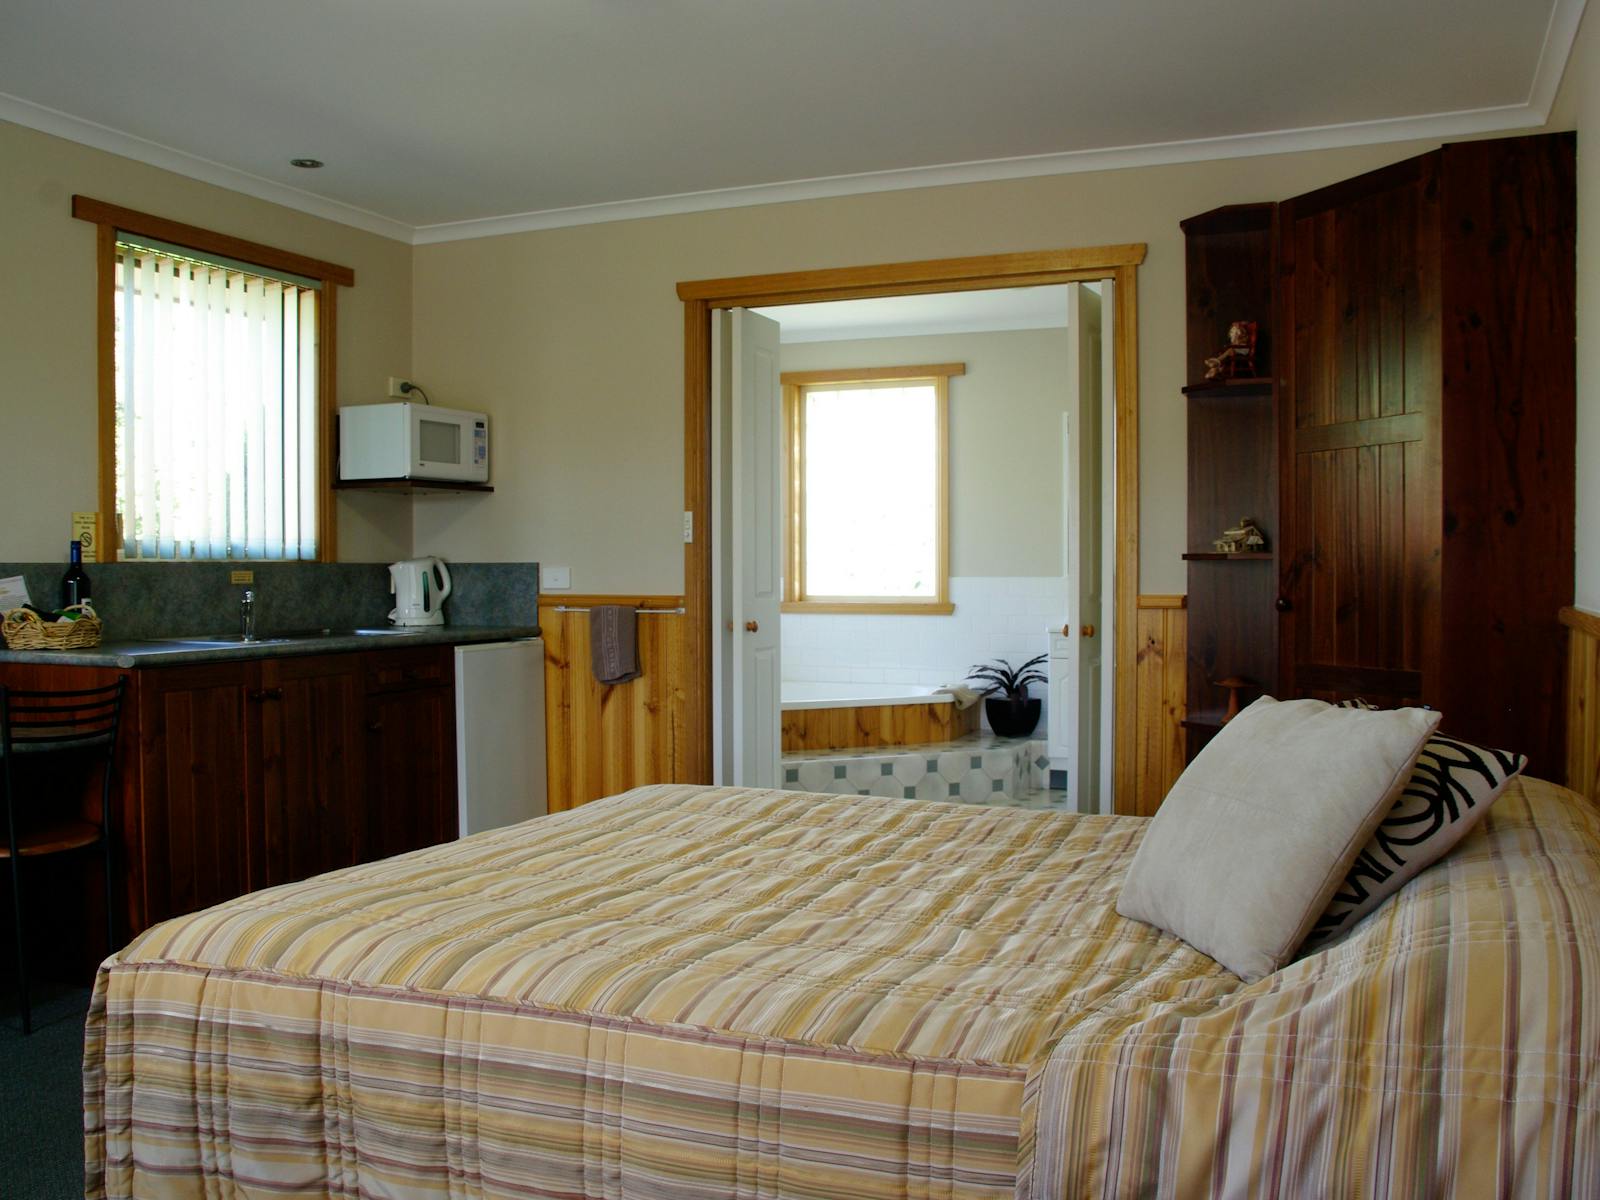 The spa room has a kitchenette with 1 Queen bed with a corner spa